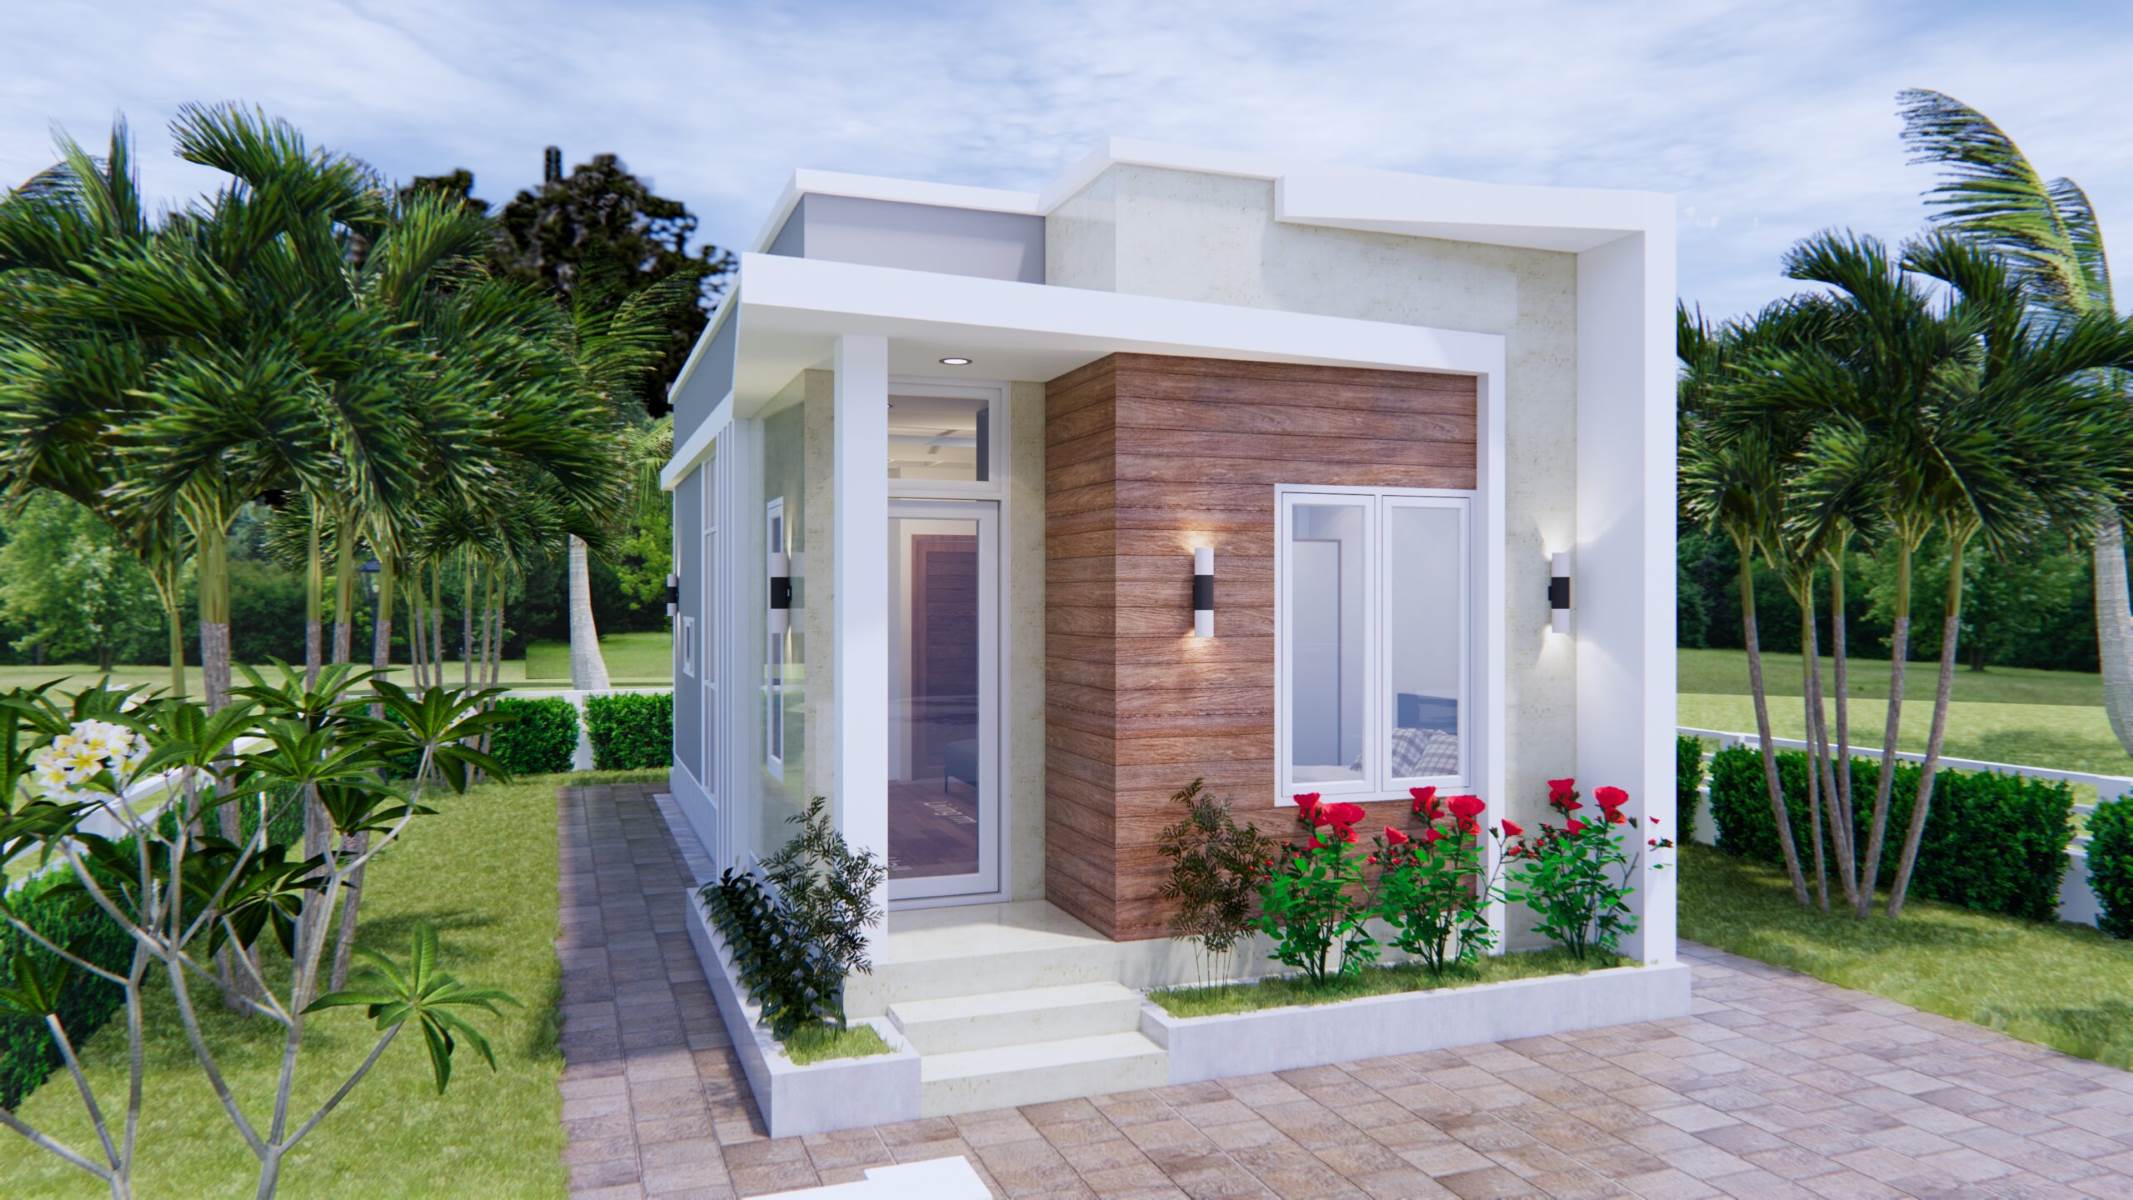 What Is New In Small House Design